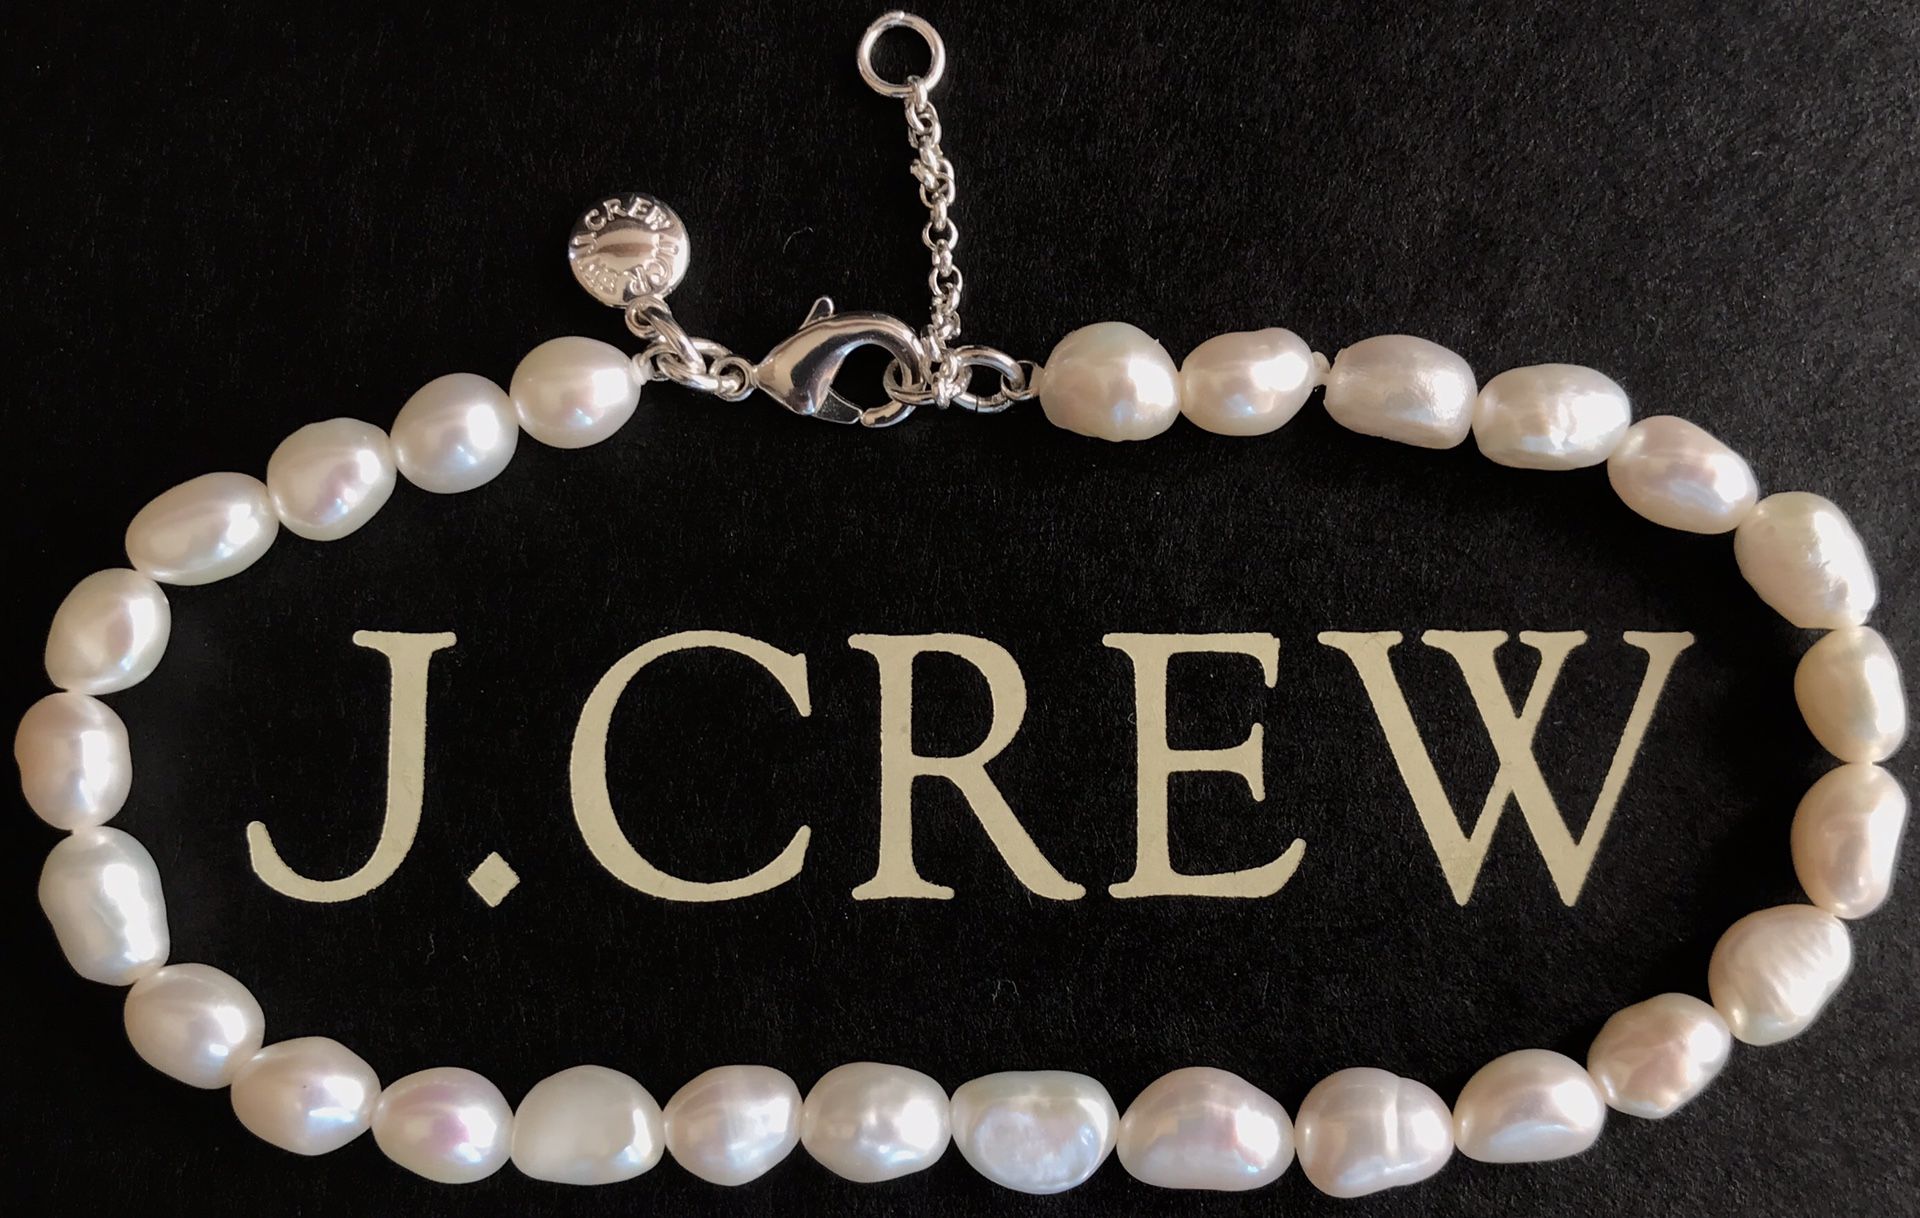 (NEW) (1 AVAILABLE) WOMEN’S J.CREW FRESHWATER PEARL ANKLET - SIZE: OS (ONE SIZE) 